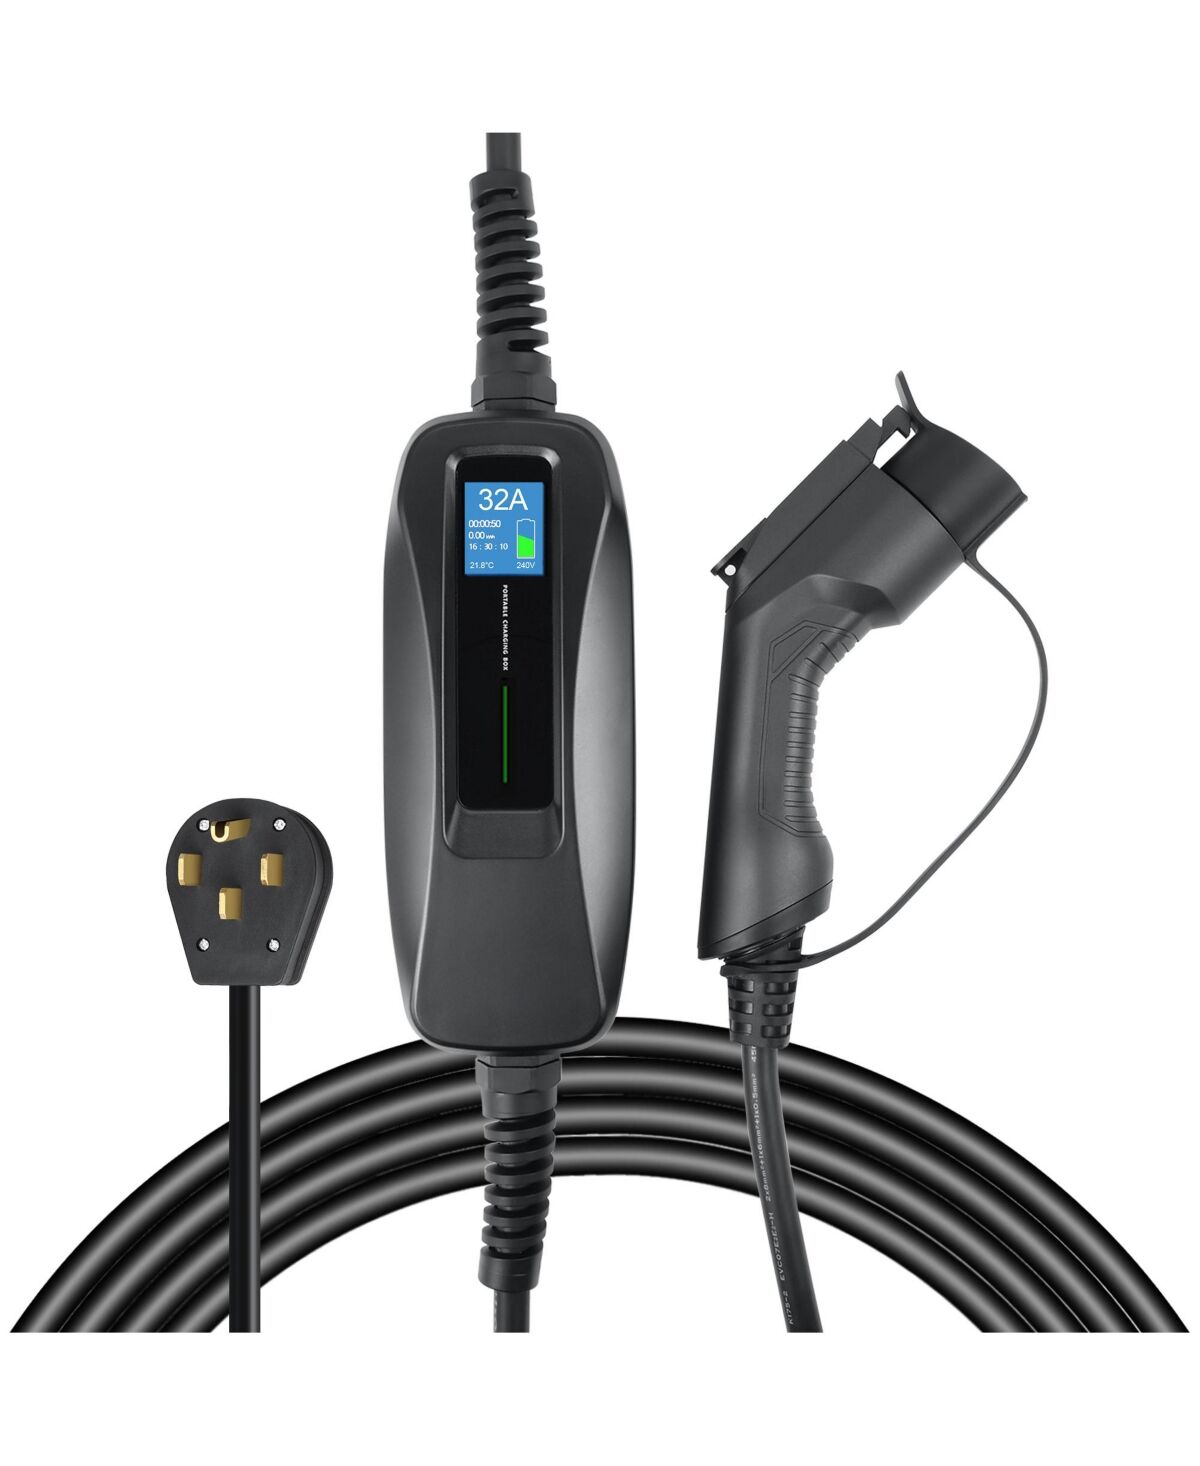 Lectron Nema 14-50 Level 2 Ev Charger - 240V 32 Amp with 15ft Extension Cord & J1772 Cable - for J1772 EVs - Black